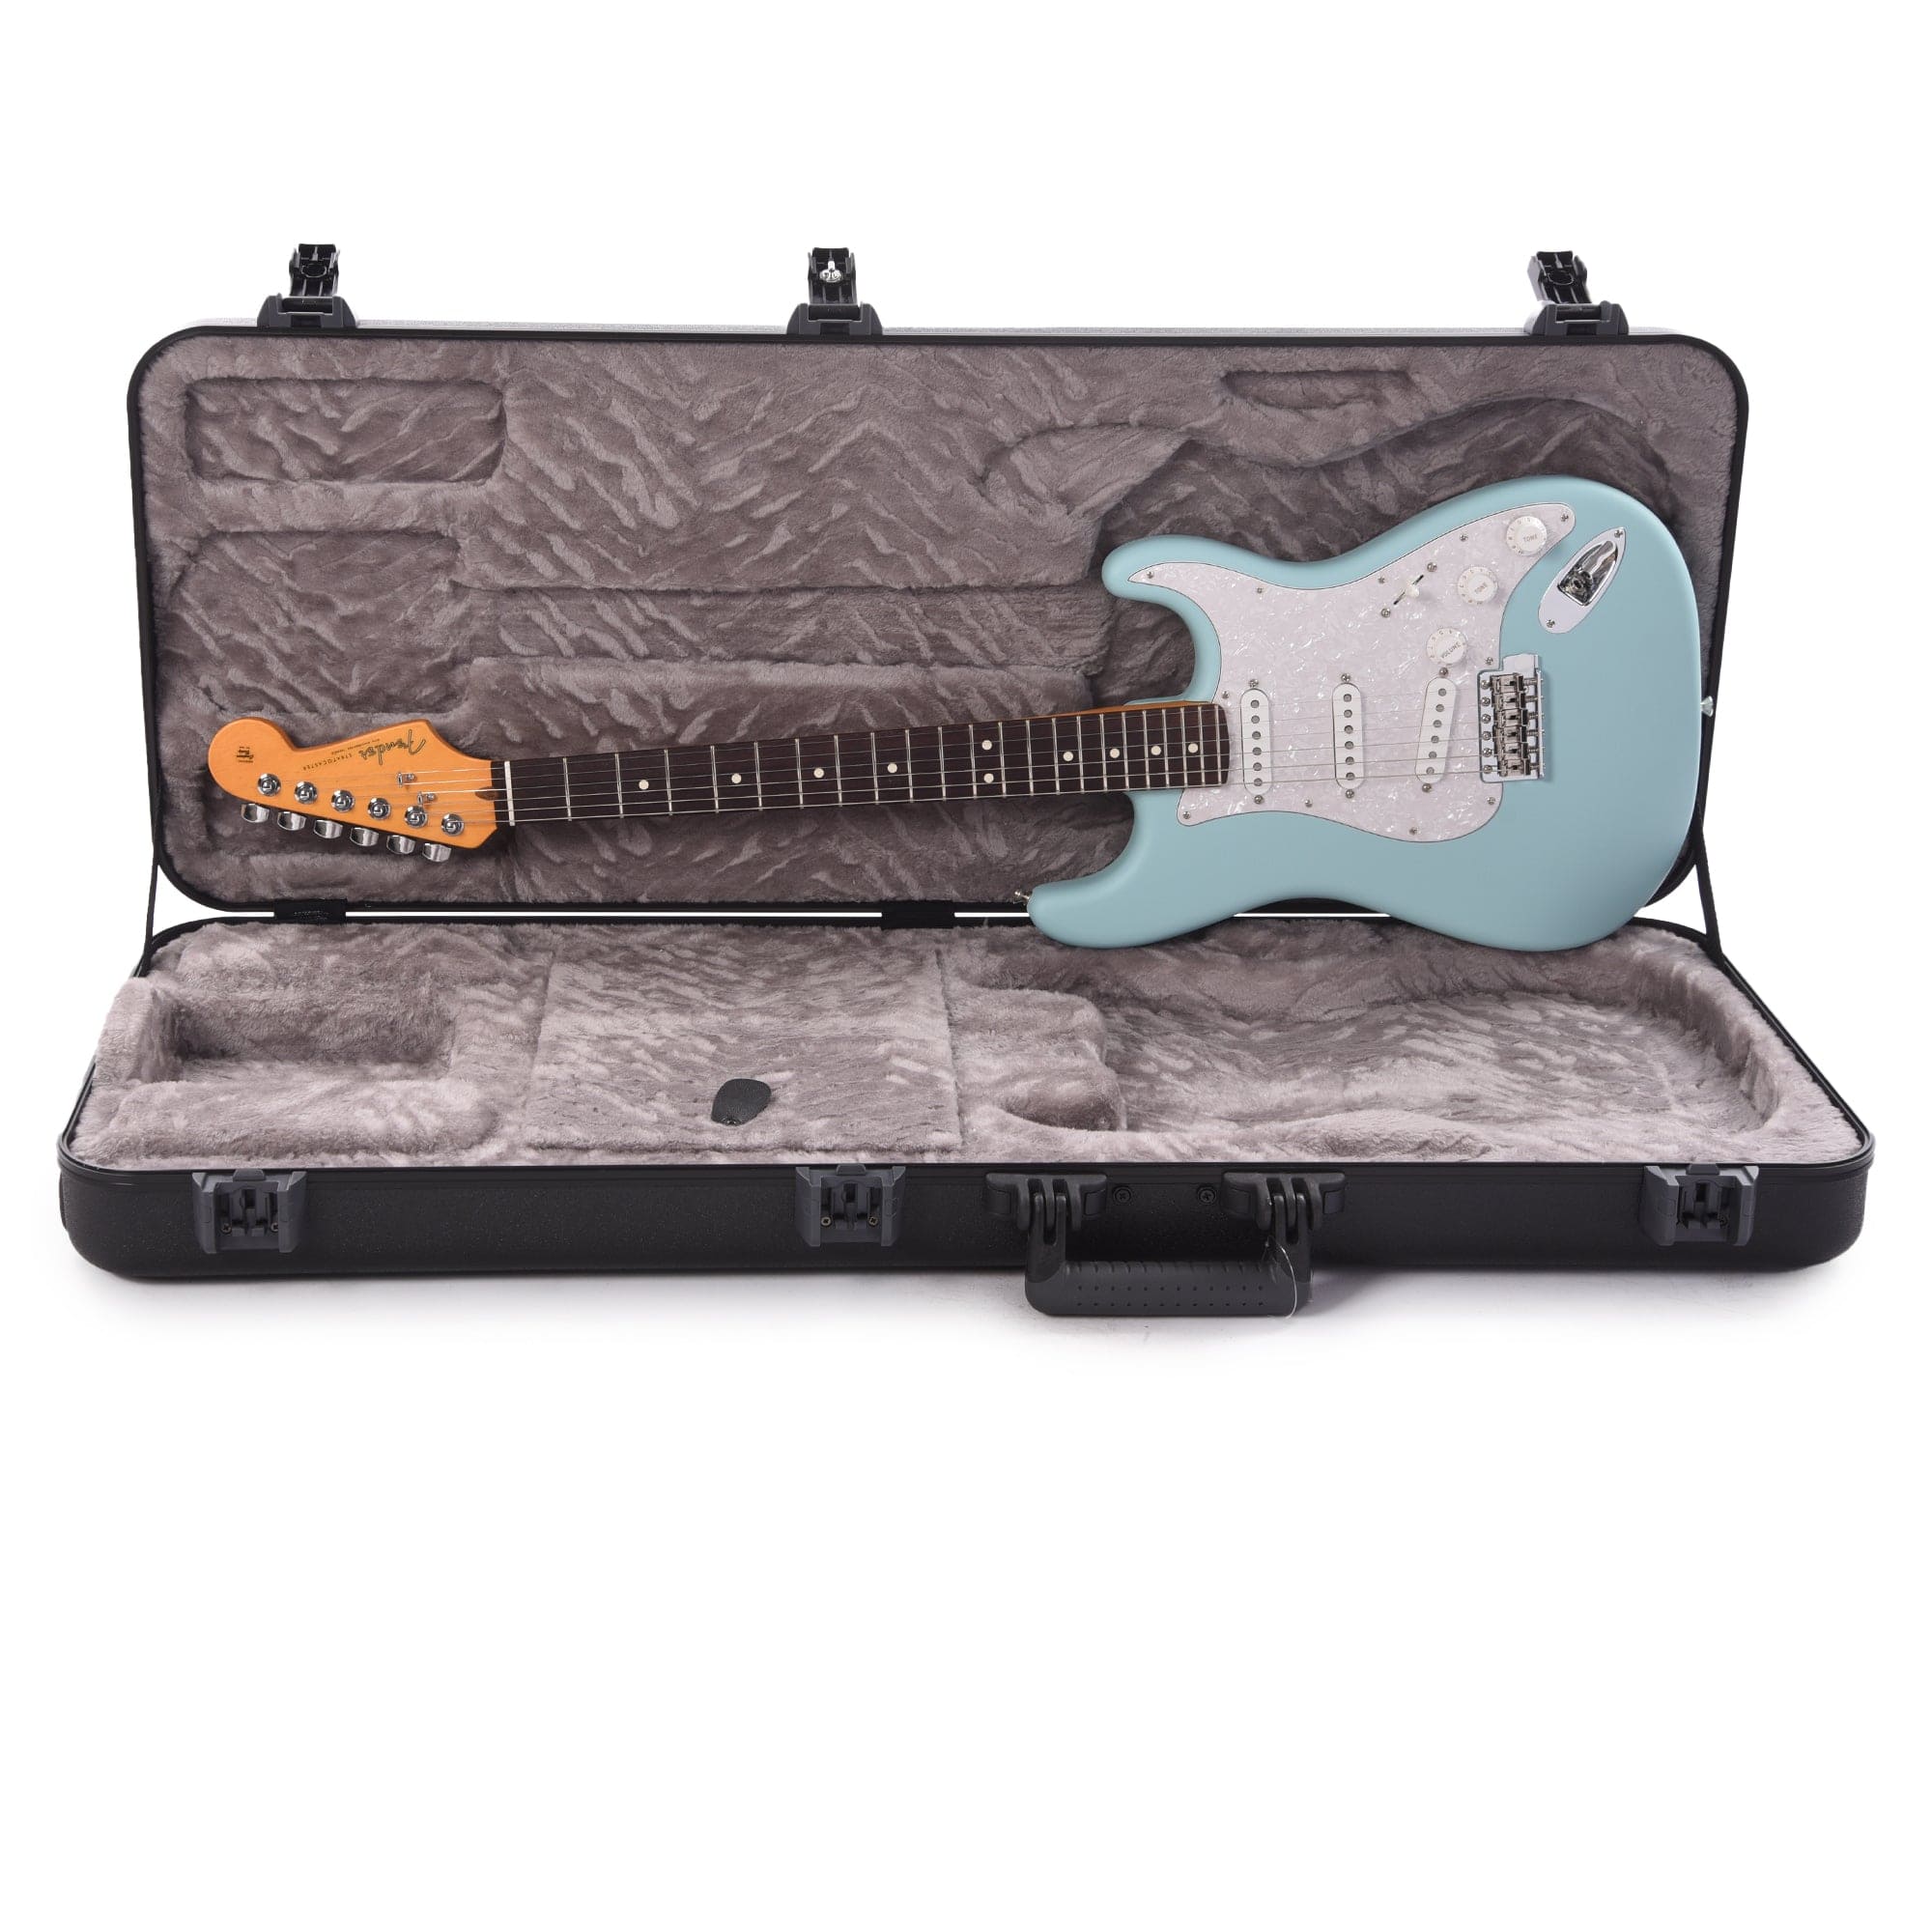 Fender Artist Limited Edition Cory Wong Stratocaster Satin Daphne Blue